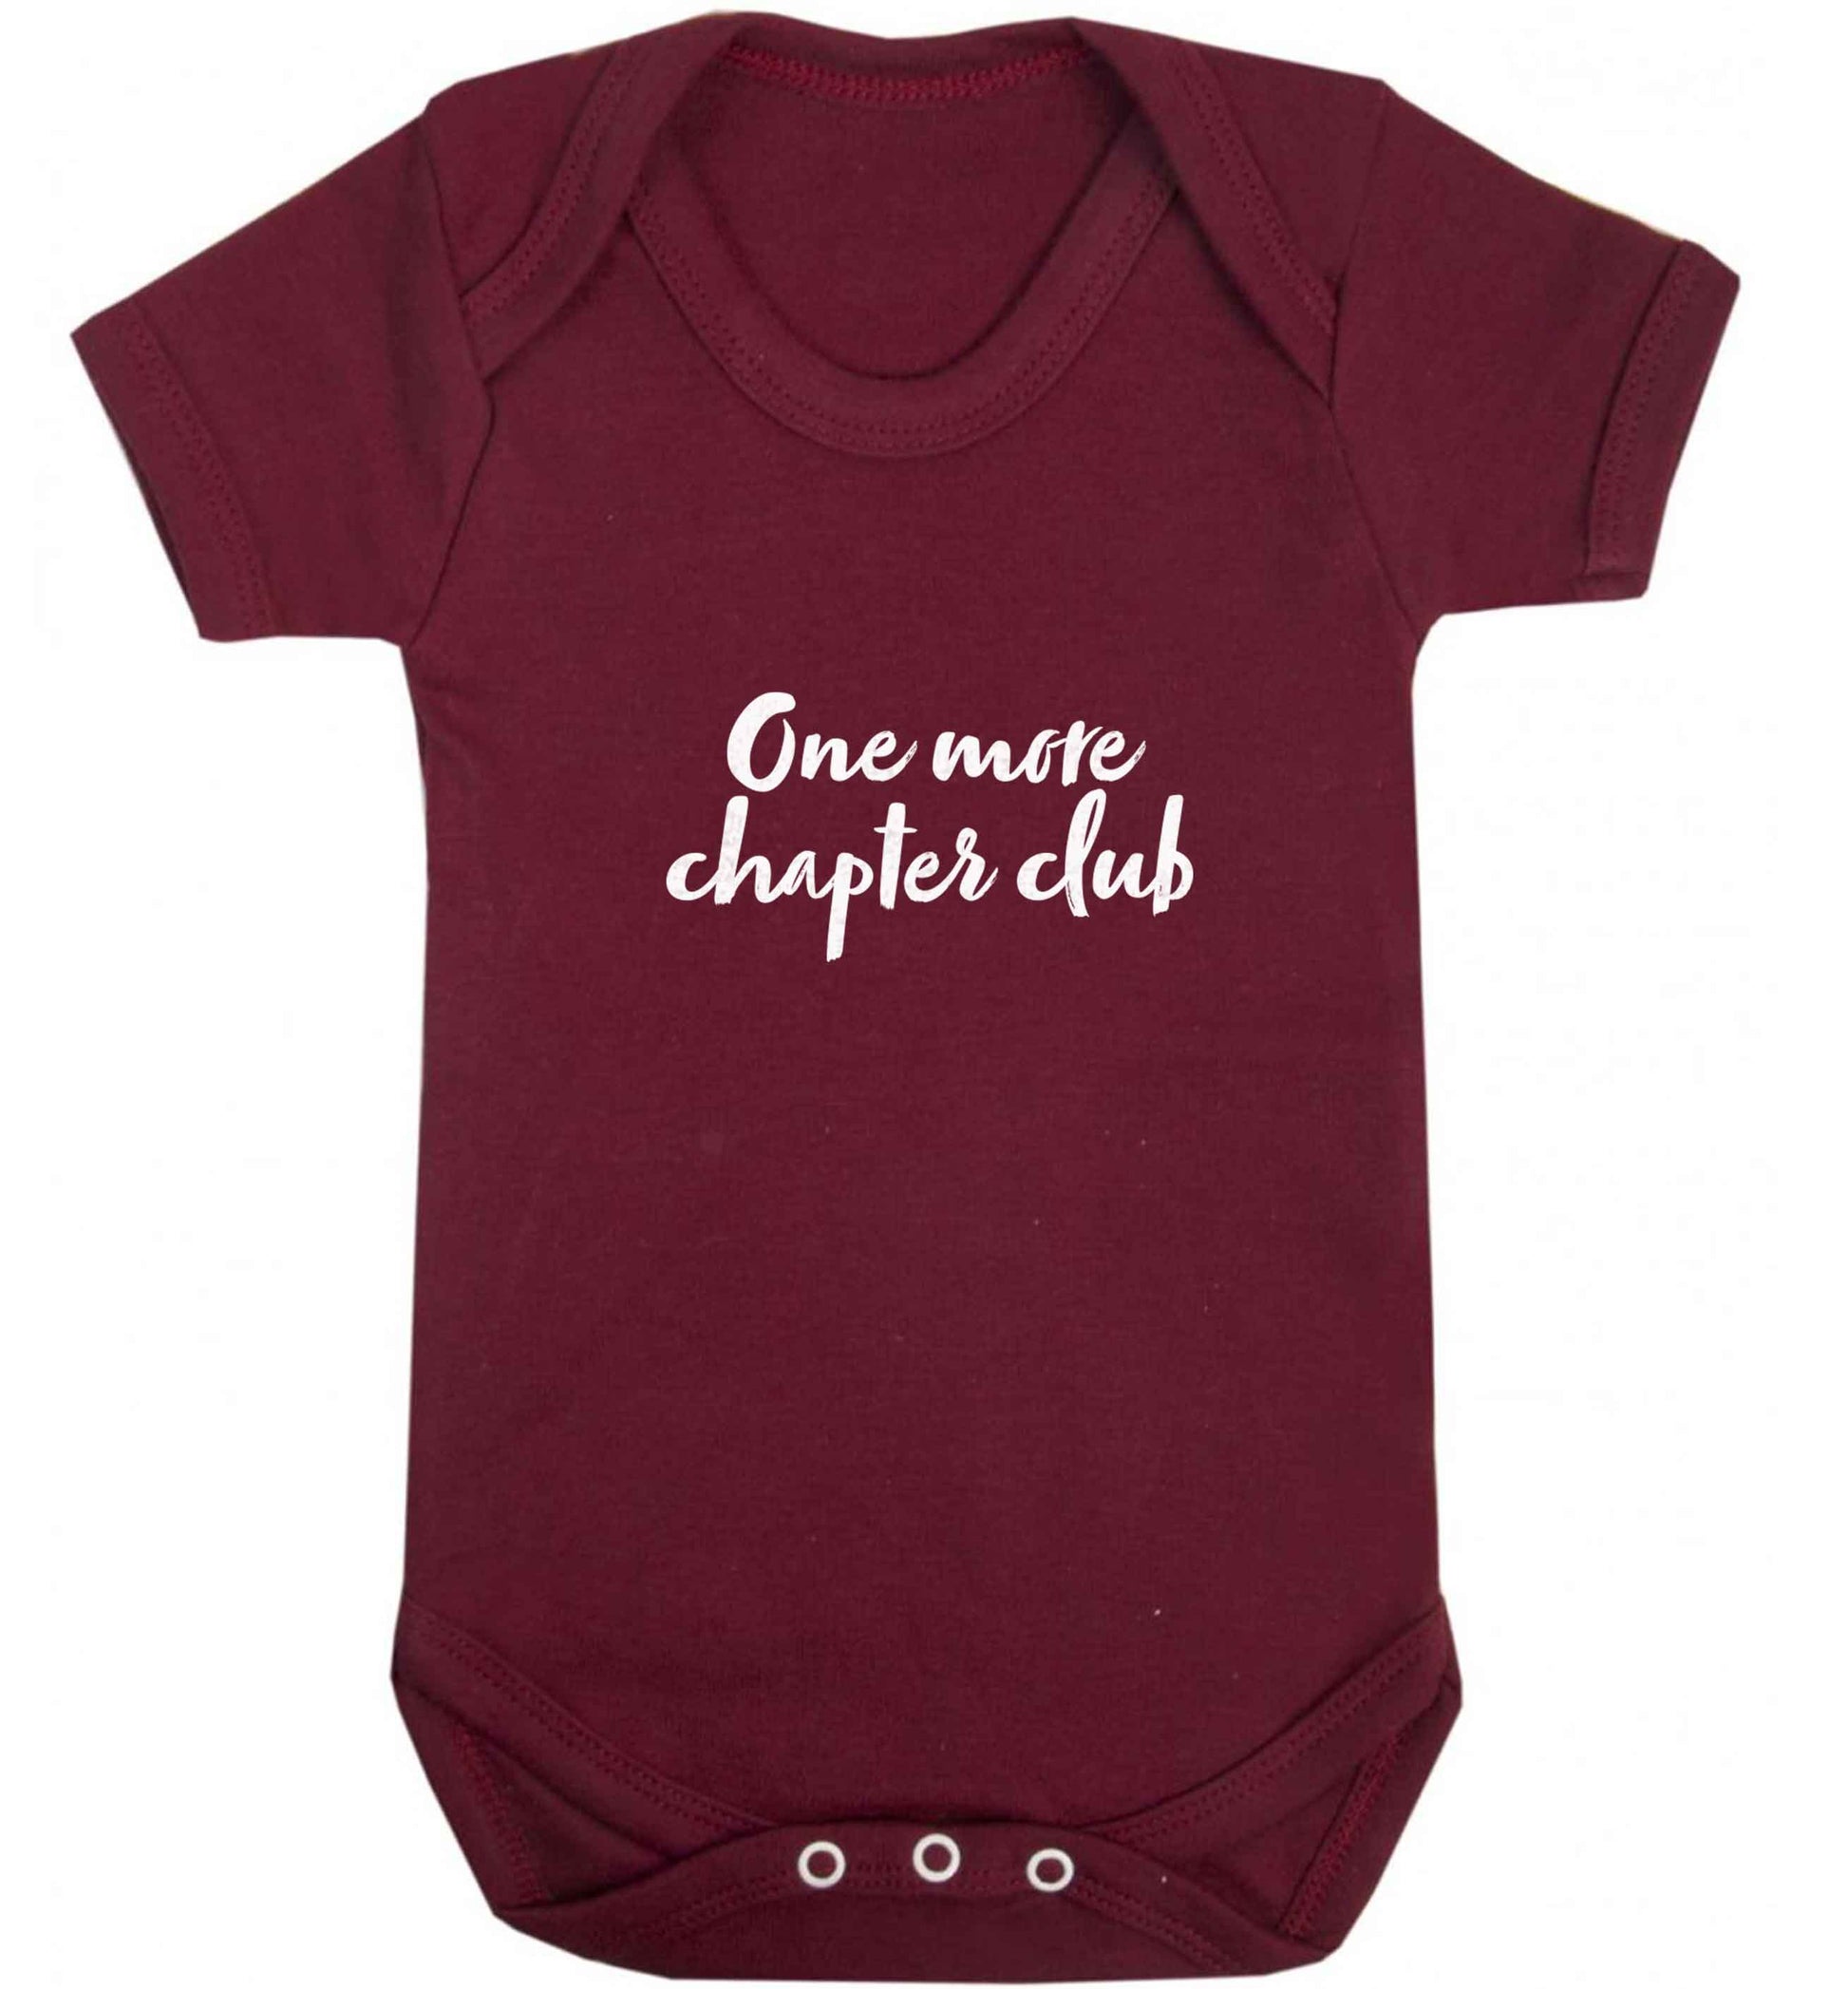 One more chapter club Kit baby vest maroon 18-24 months